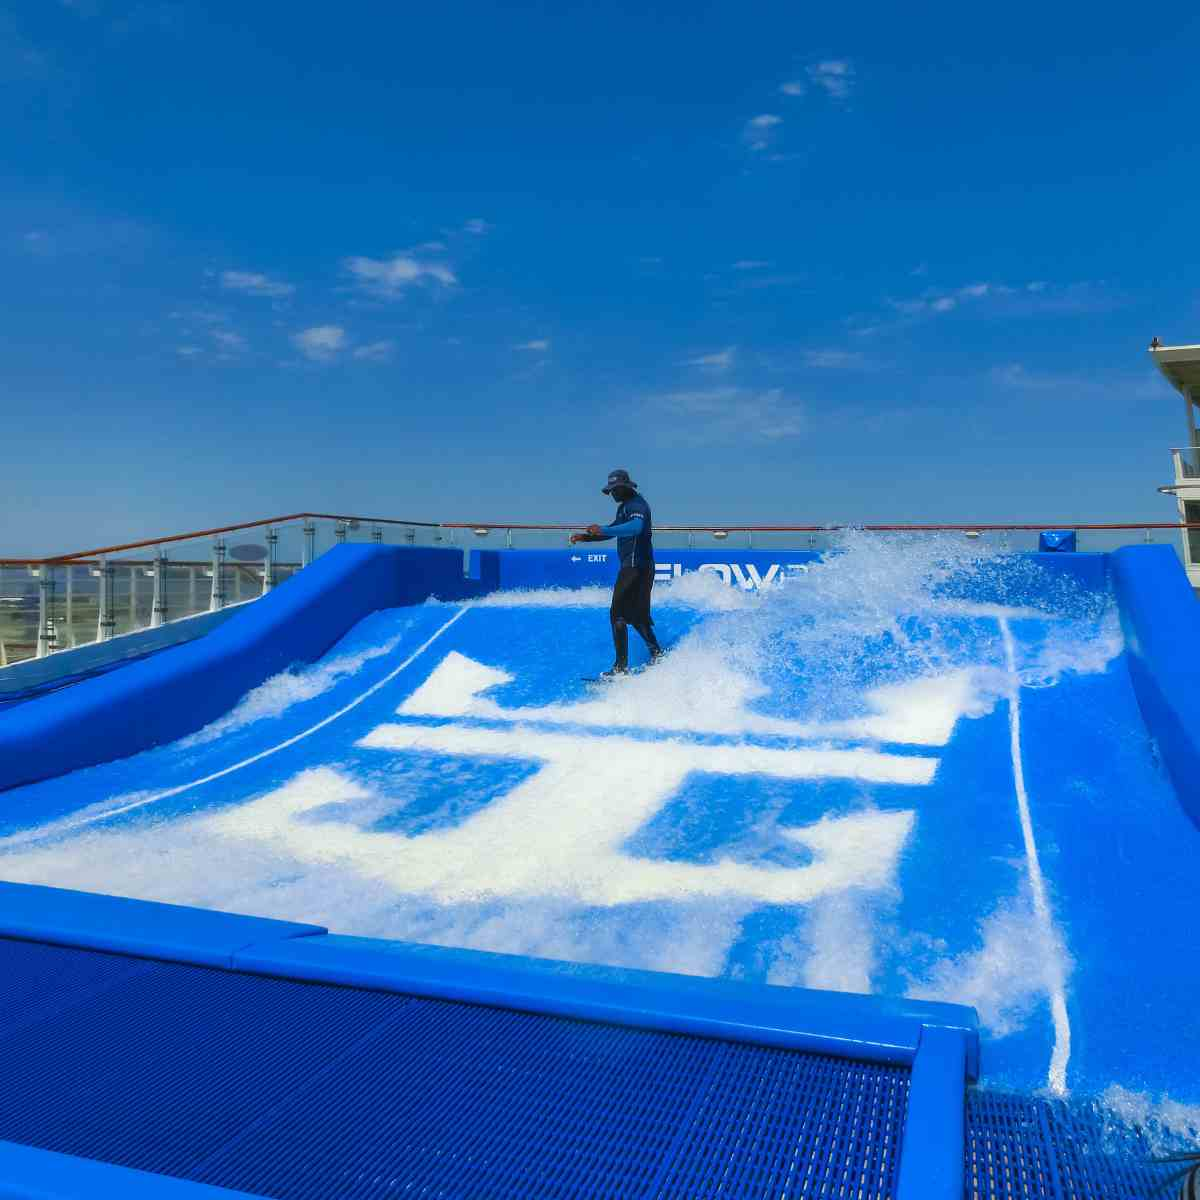 Cape Canaveral, USA - APRIL 29, 2018: Woman surfing on the Flow Rider at Oasis of the Seas at Cape Canaveral, USA on april 29, 2018. — Photo by Marina113